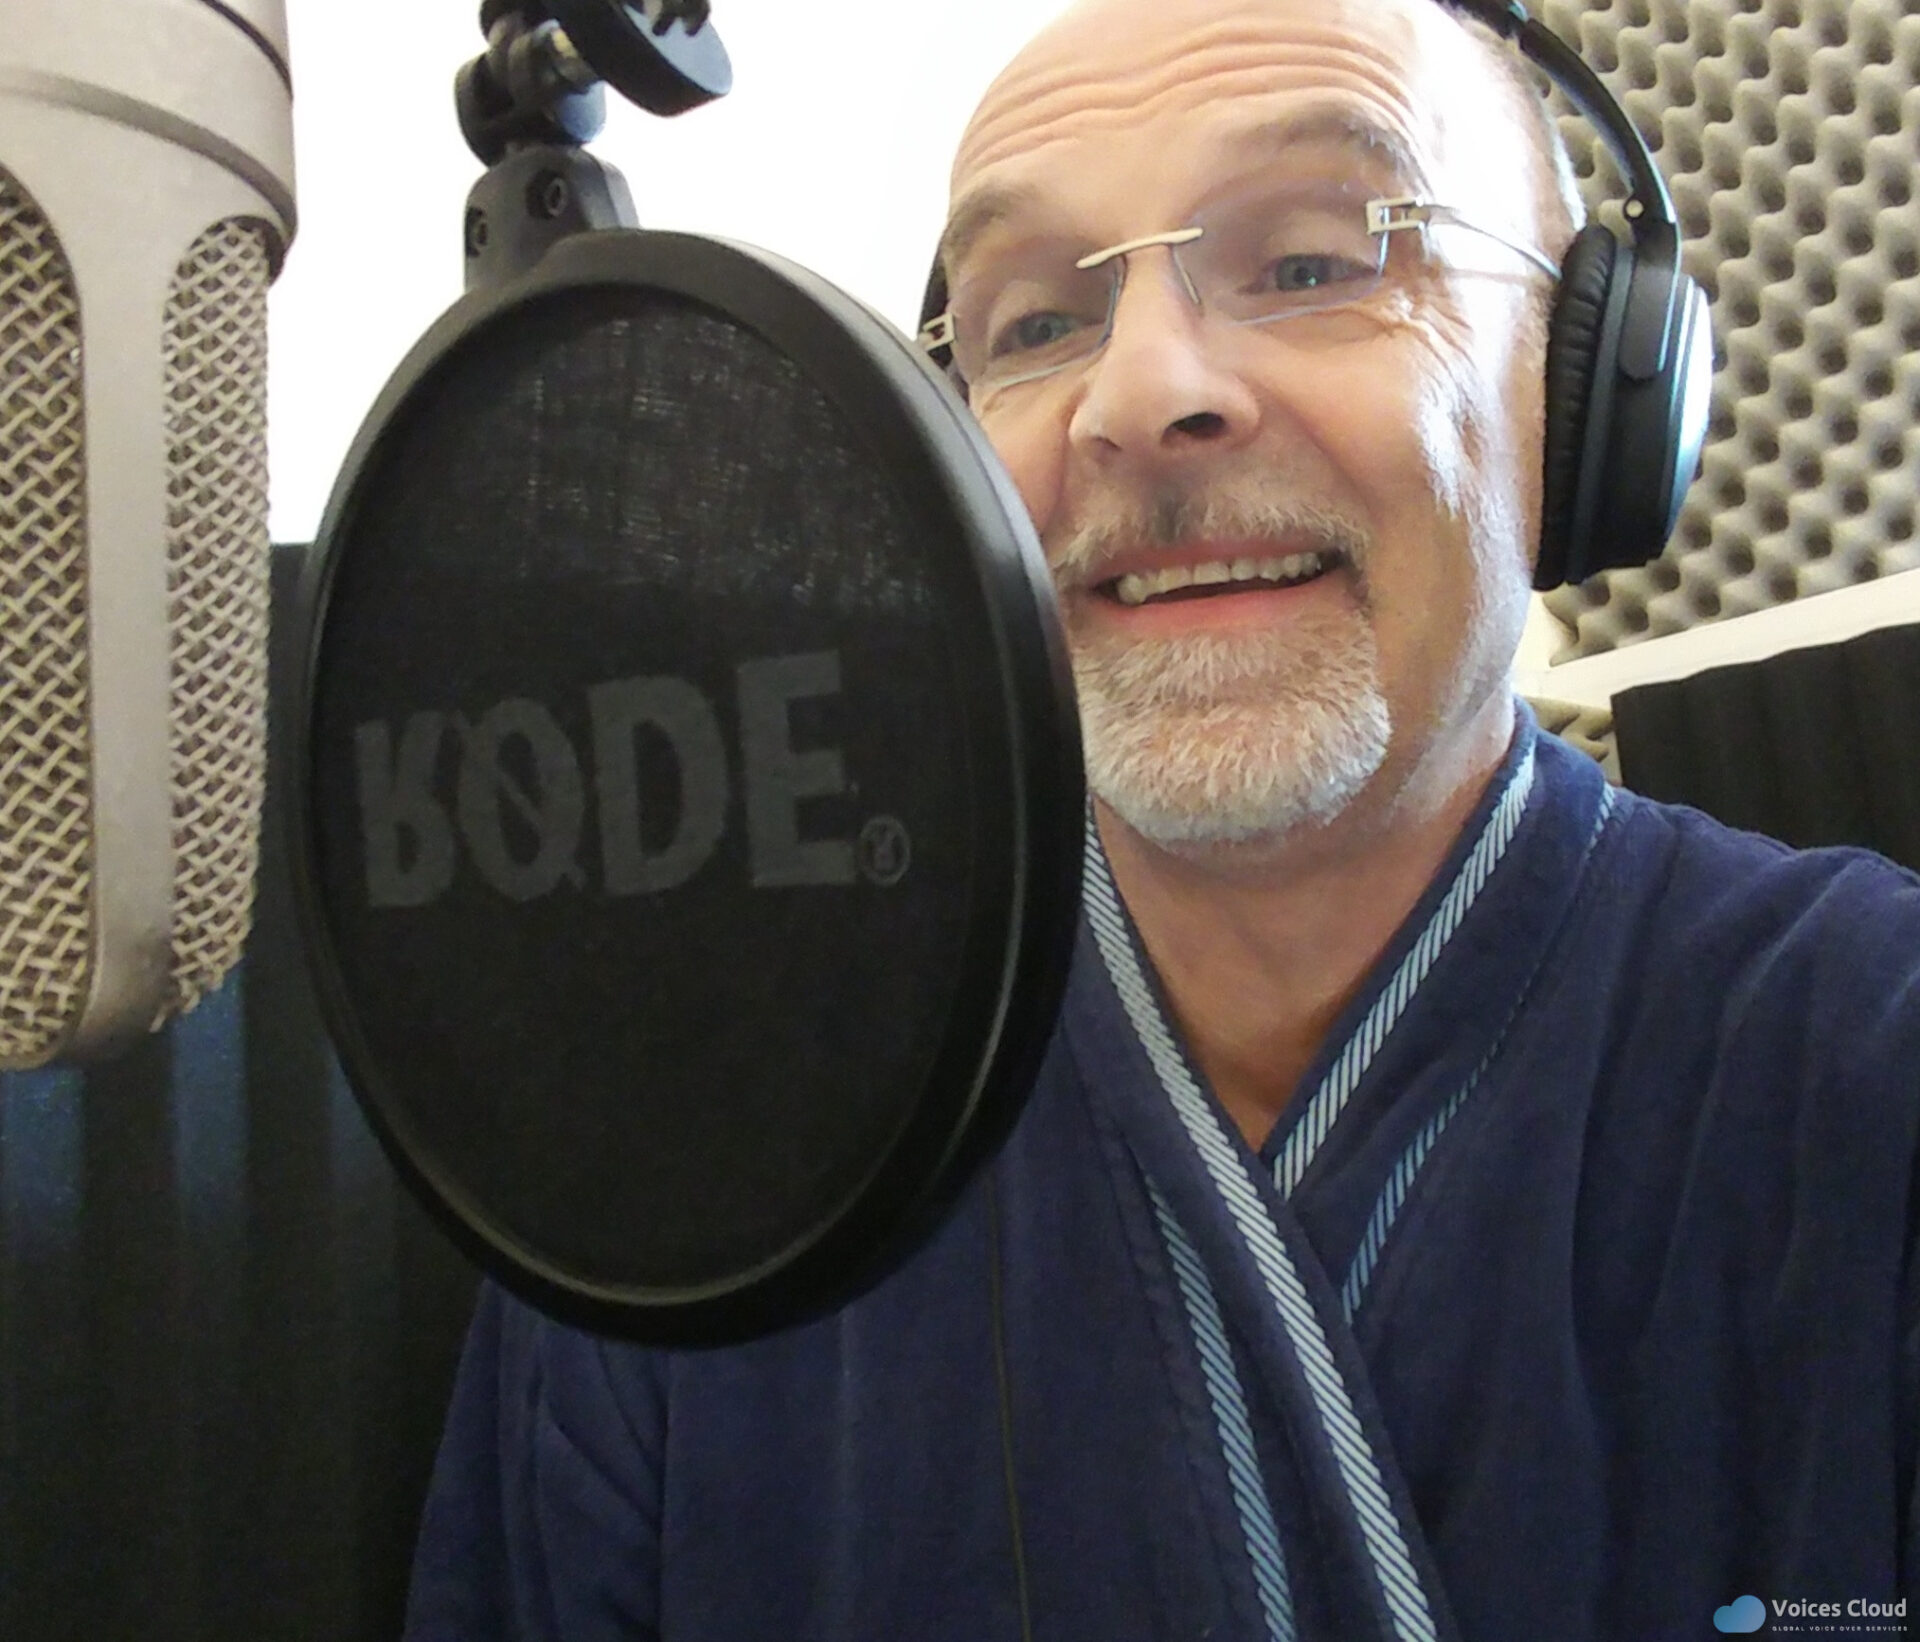 11445Professionally record a voice over in greek impersonating lots of characters